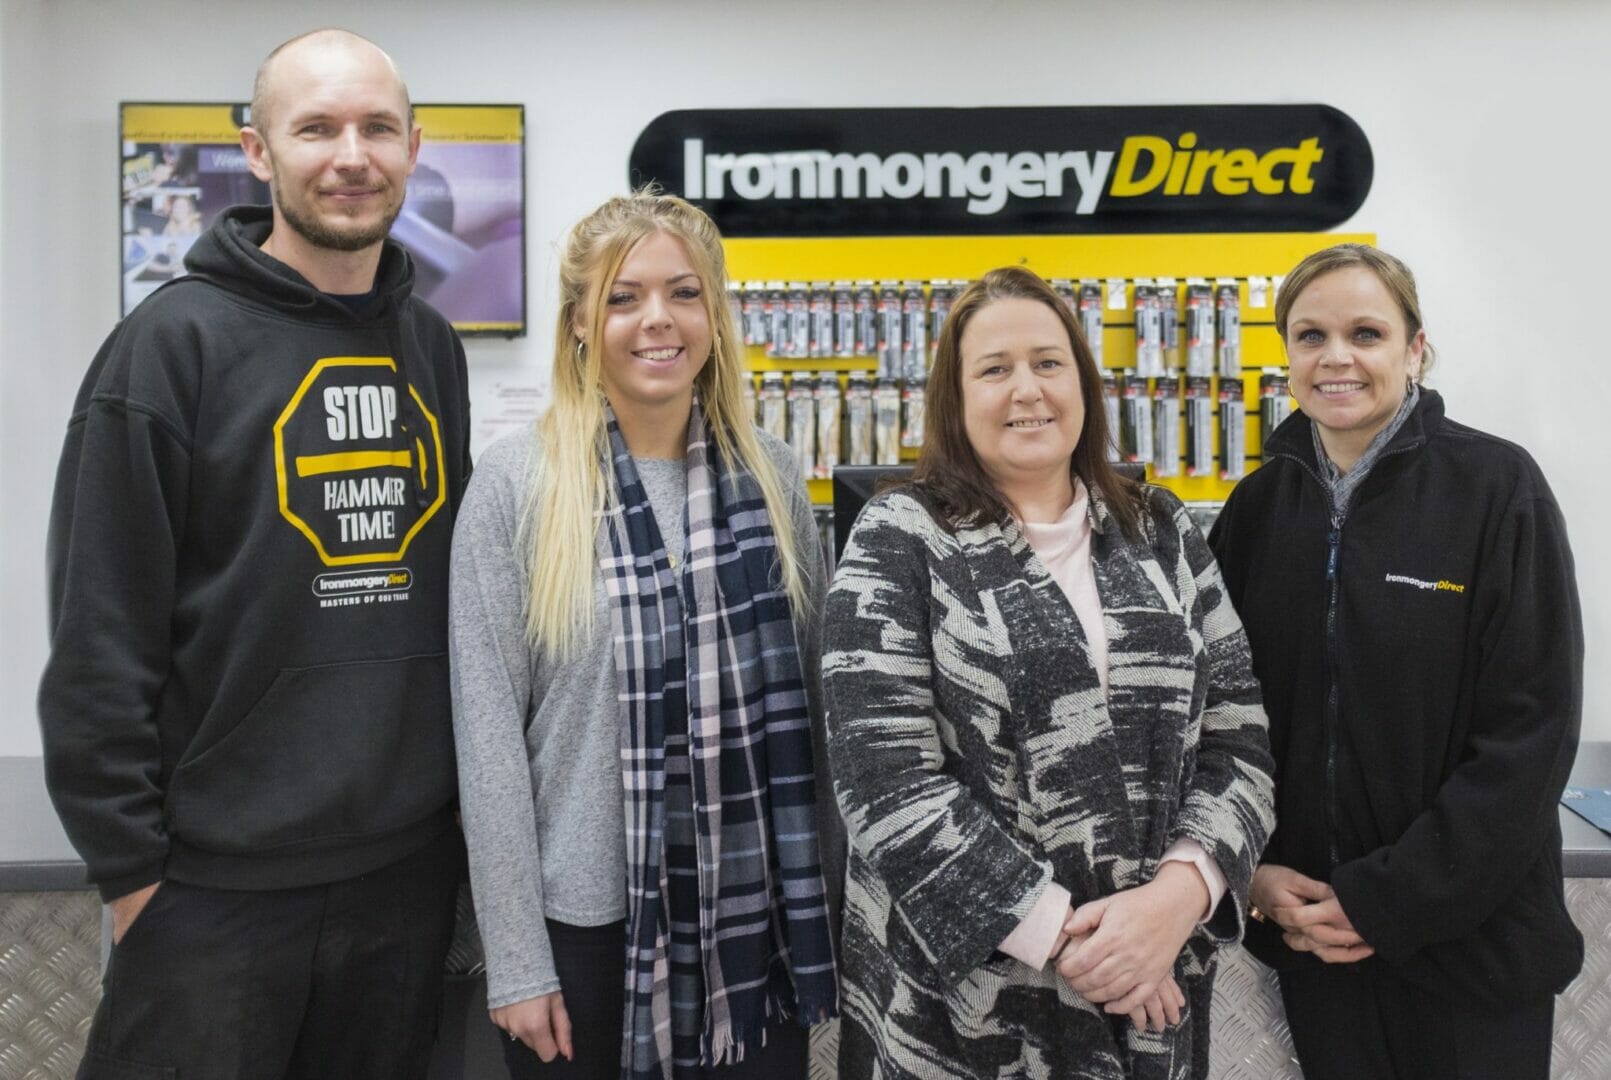 Even more IronmongeryDirect staff achieve Guild of Architectural Ironmongers (GAI) qualification @IronmngryDirect